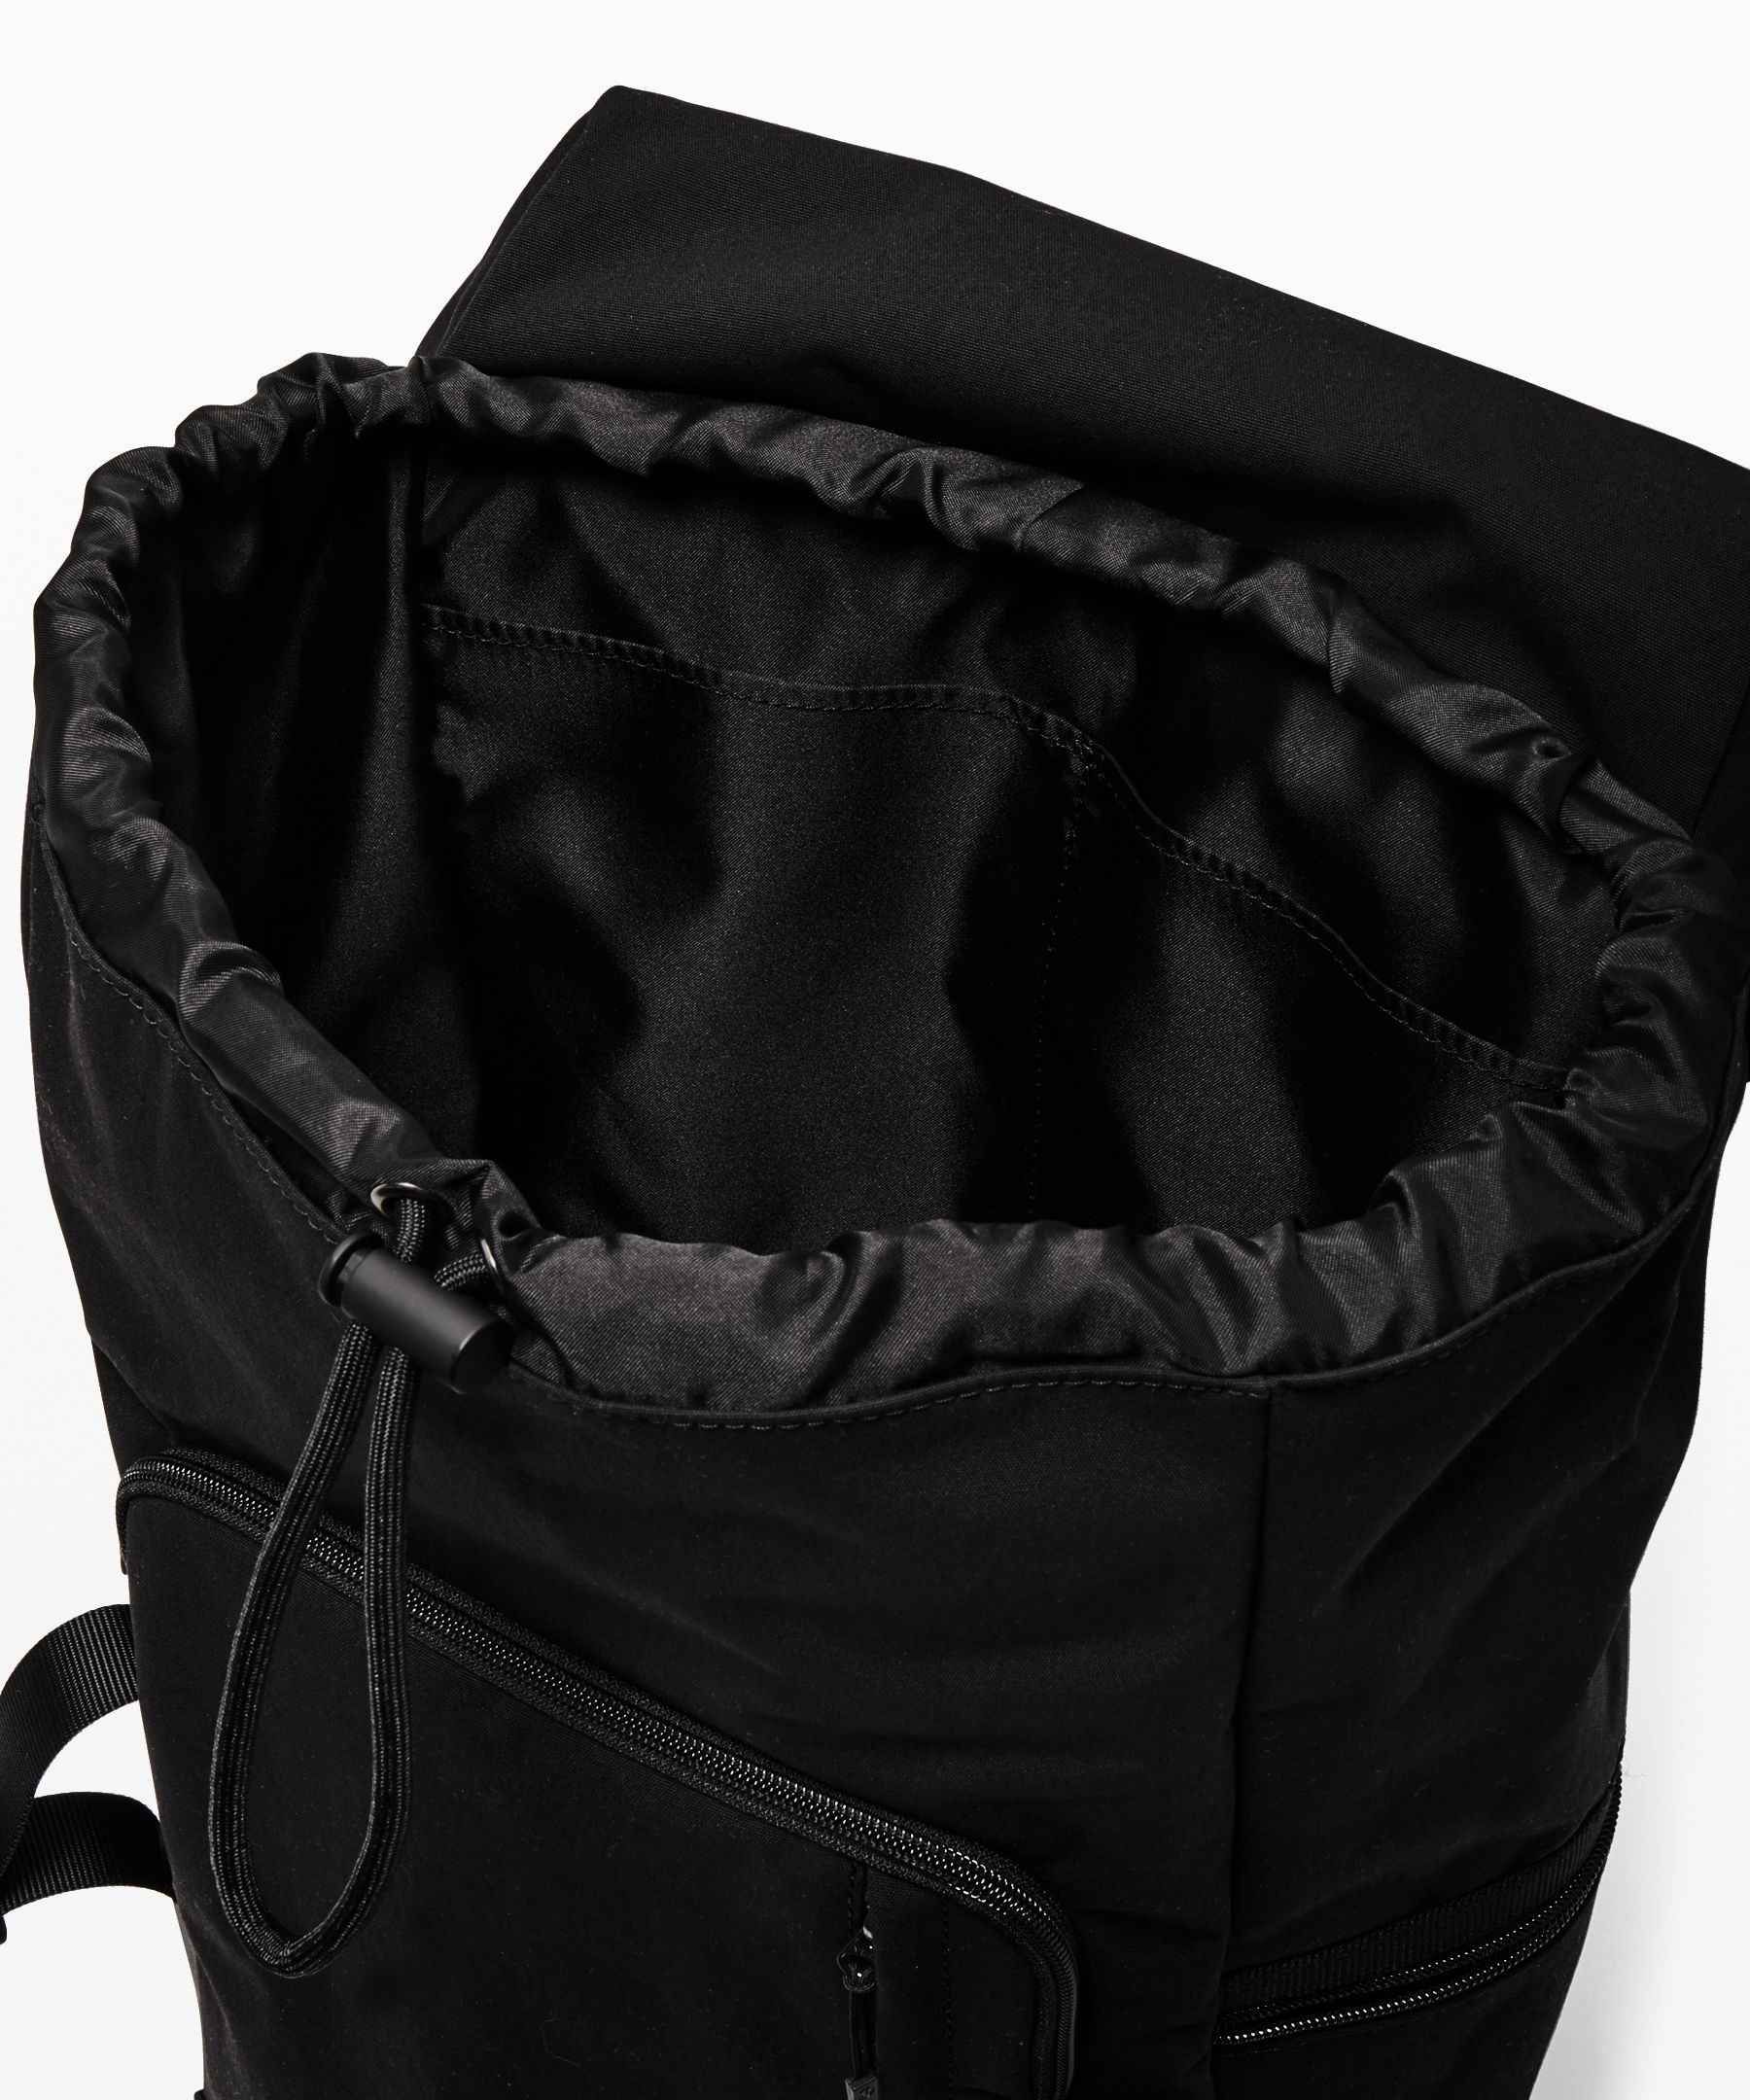 command the day commute bag lululemon